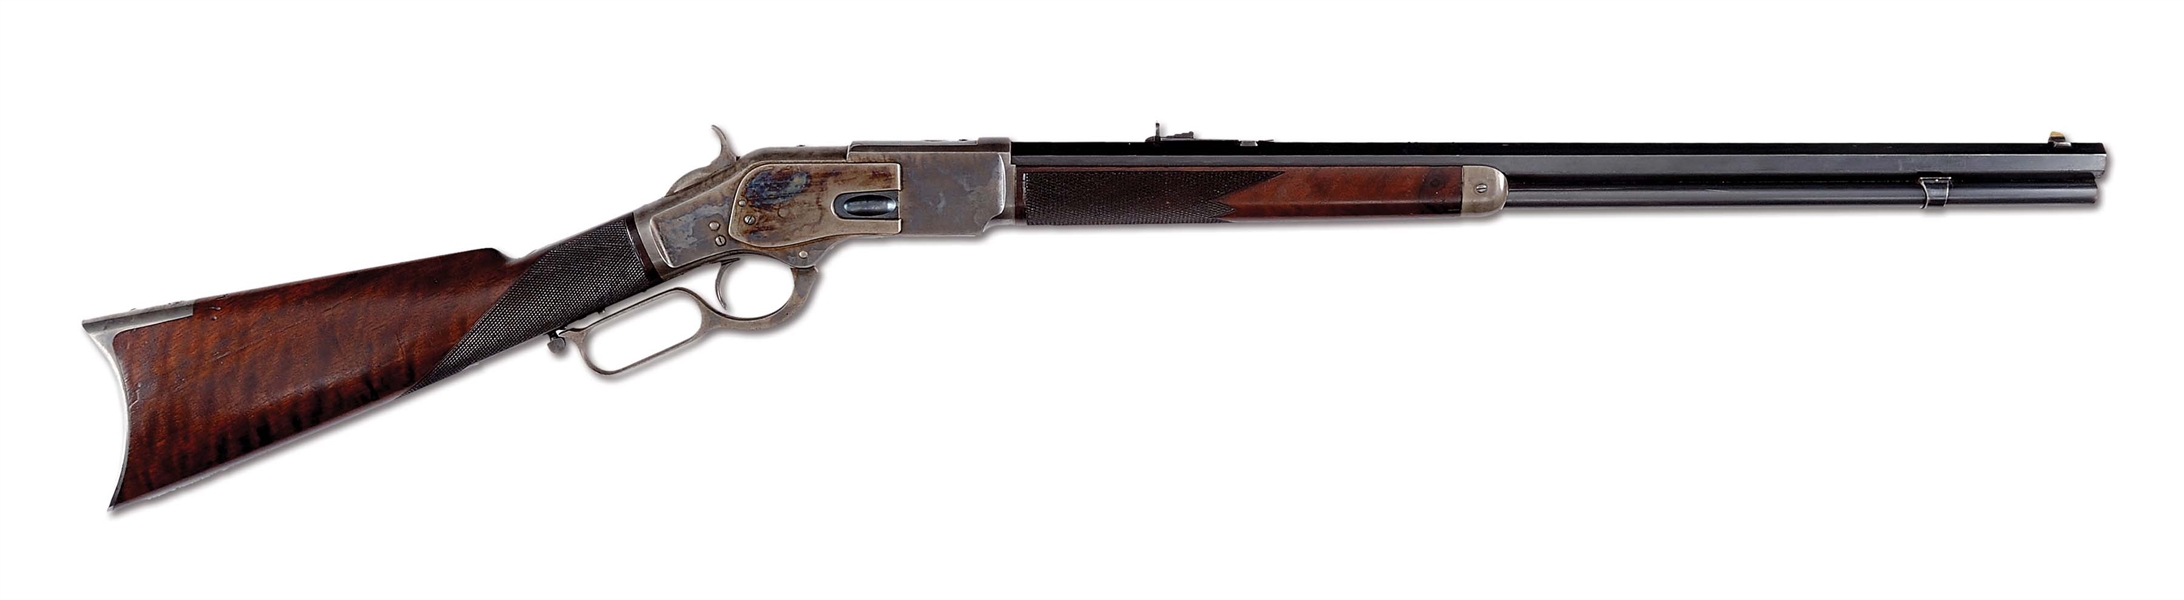 (A) MAGNIFICENT DOCUMENTED WINCHESTER FIRST MODEL 1873 DELUXE RIFLE (1877).